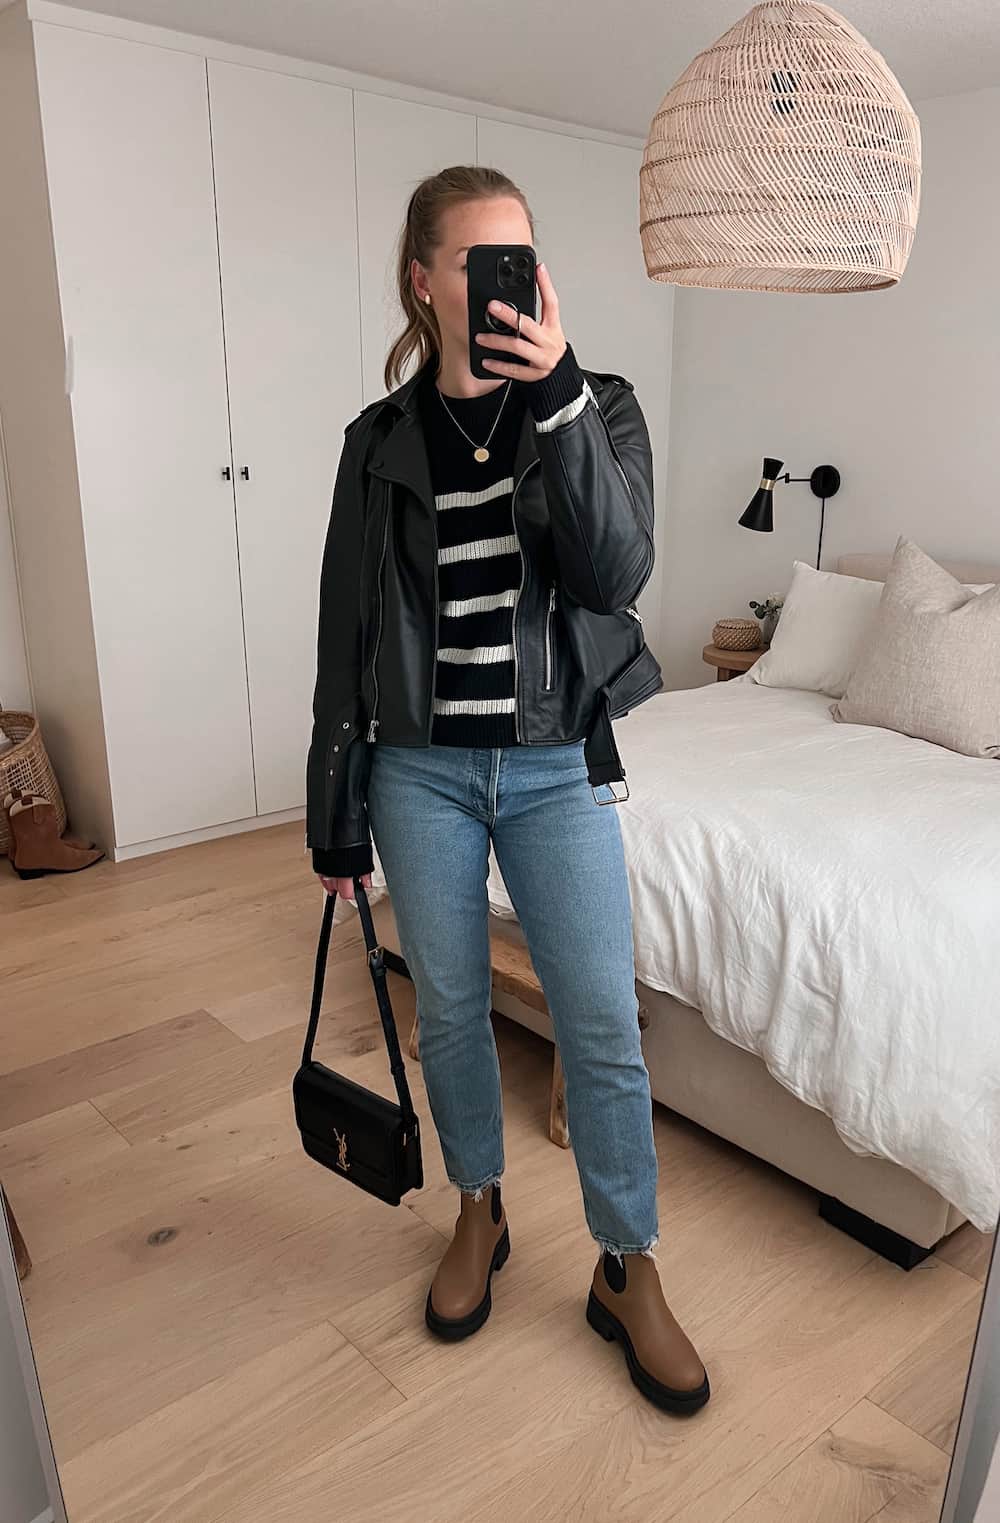 Christal wearing jeans, Chelsea boots and a black and white sweater under a leather jacket.